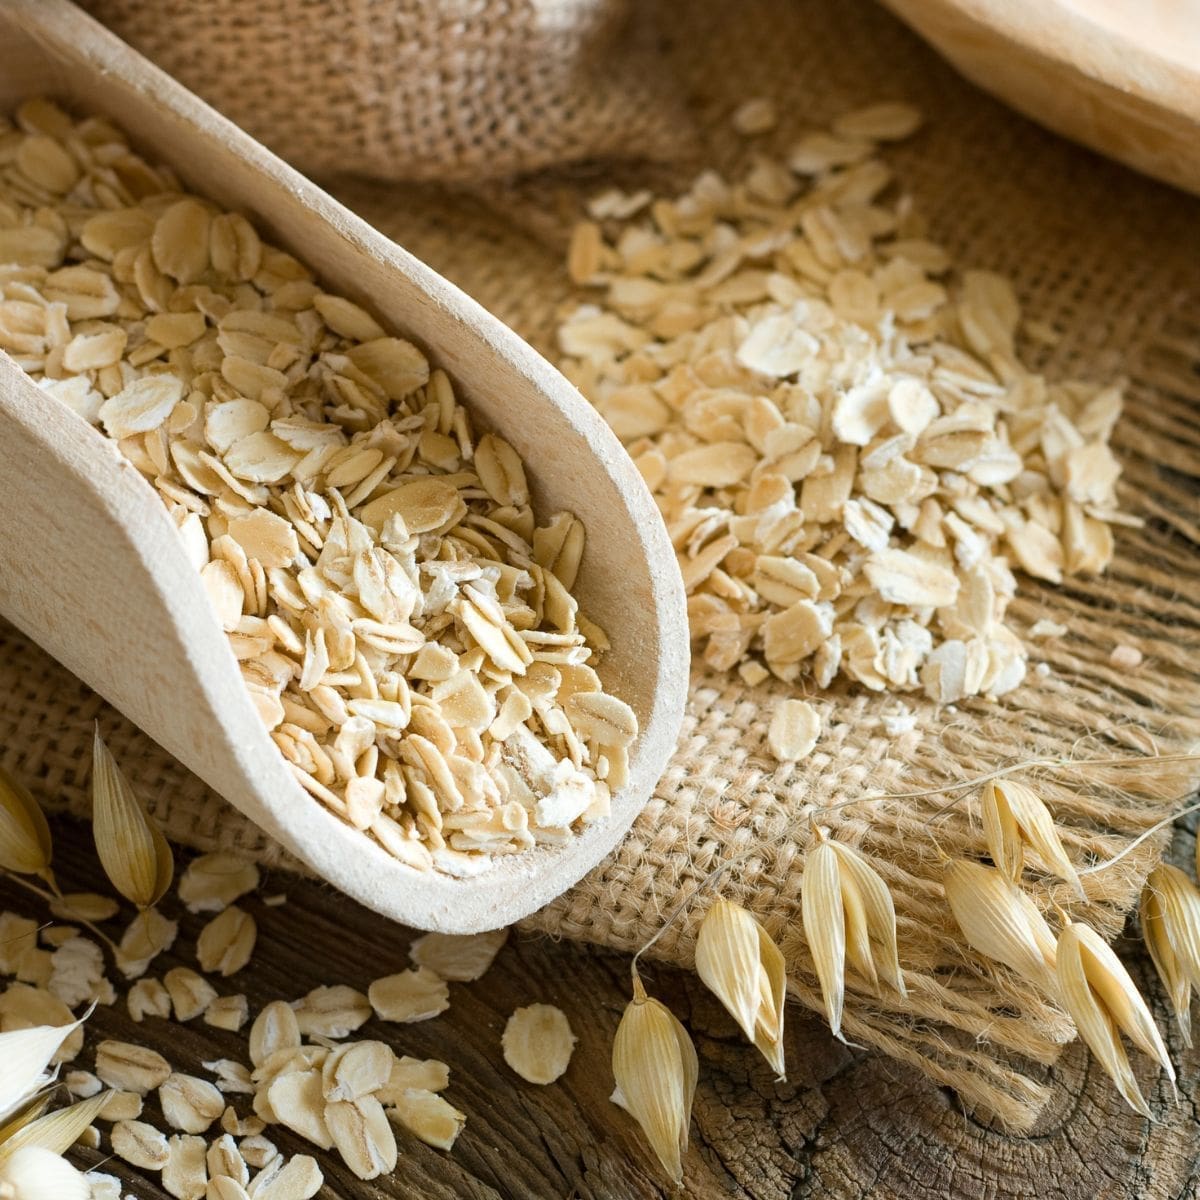 Substitute For Oatmeal In Baking: 5 Good Alternatives